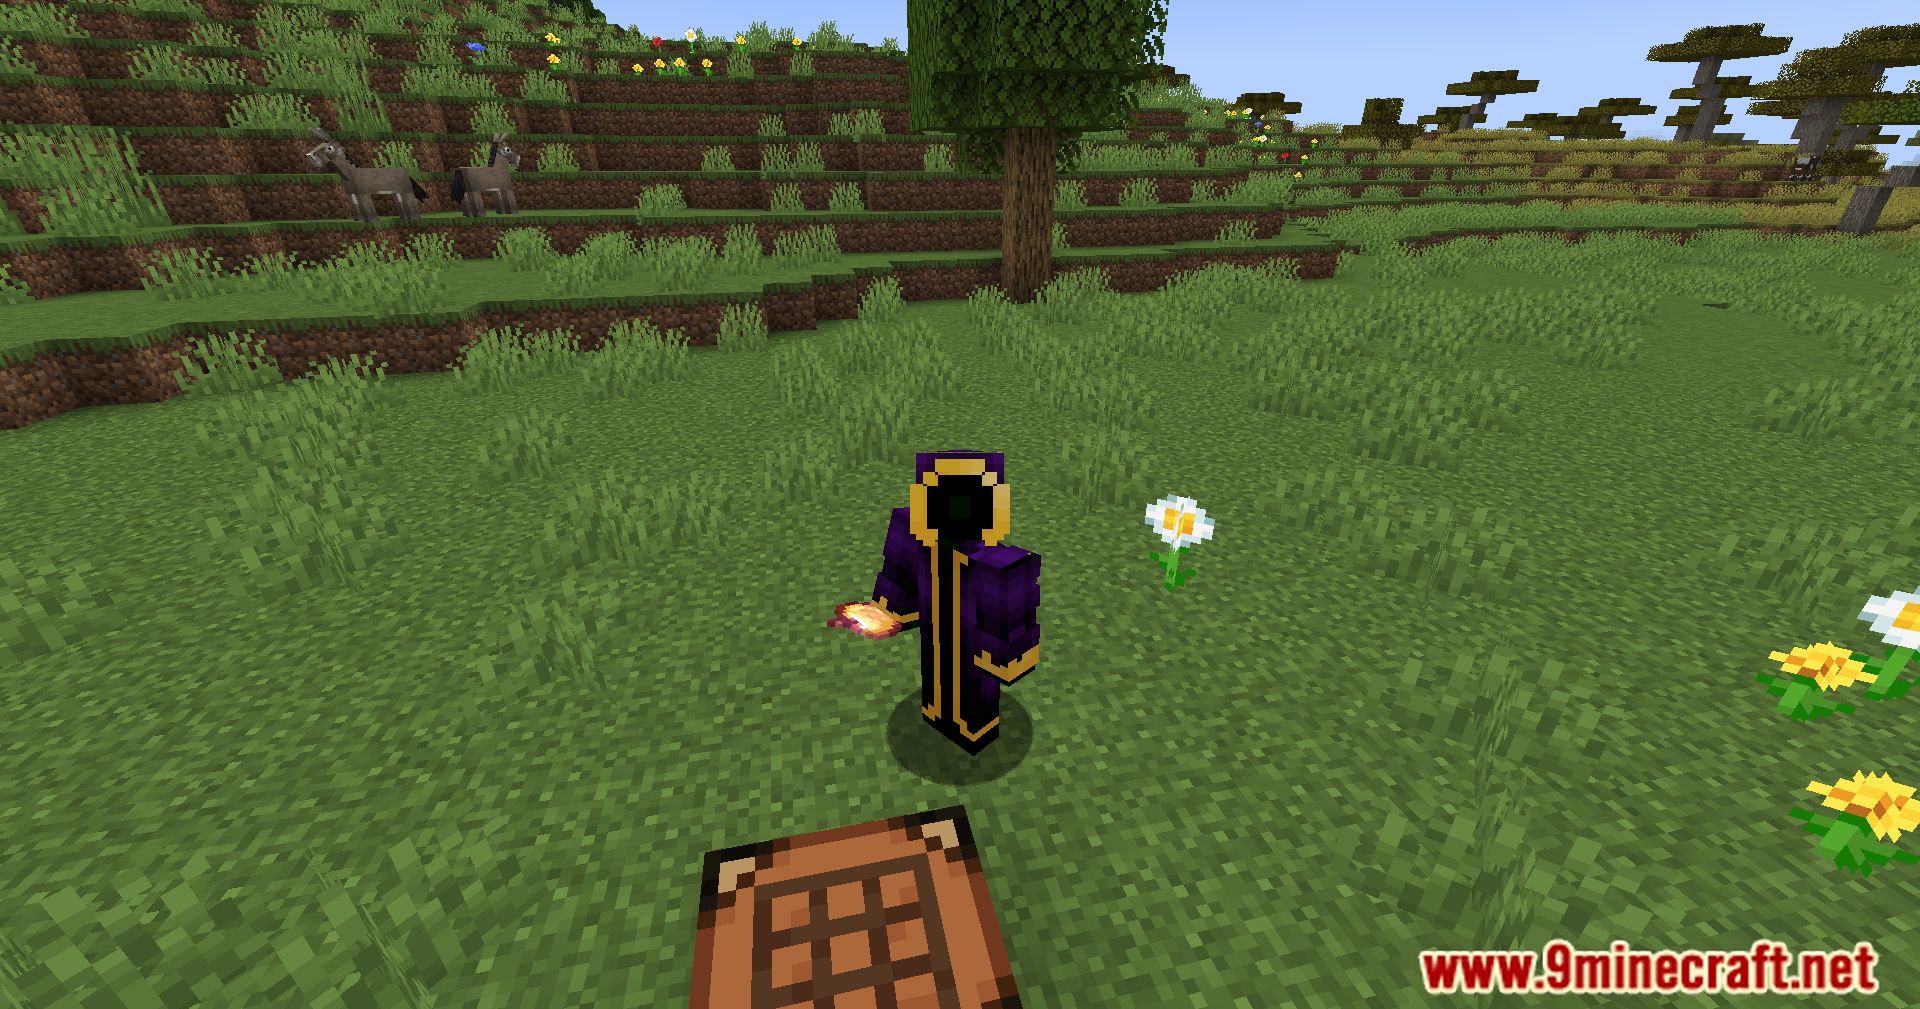 Craftable Enchanted Golden Apple Mod (1.20.4, 1.19.4) - Return To Classic Crafting, Reintroducing Notch Apples 9